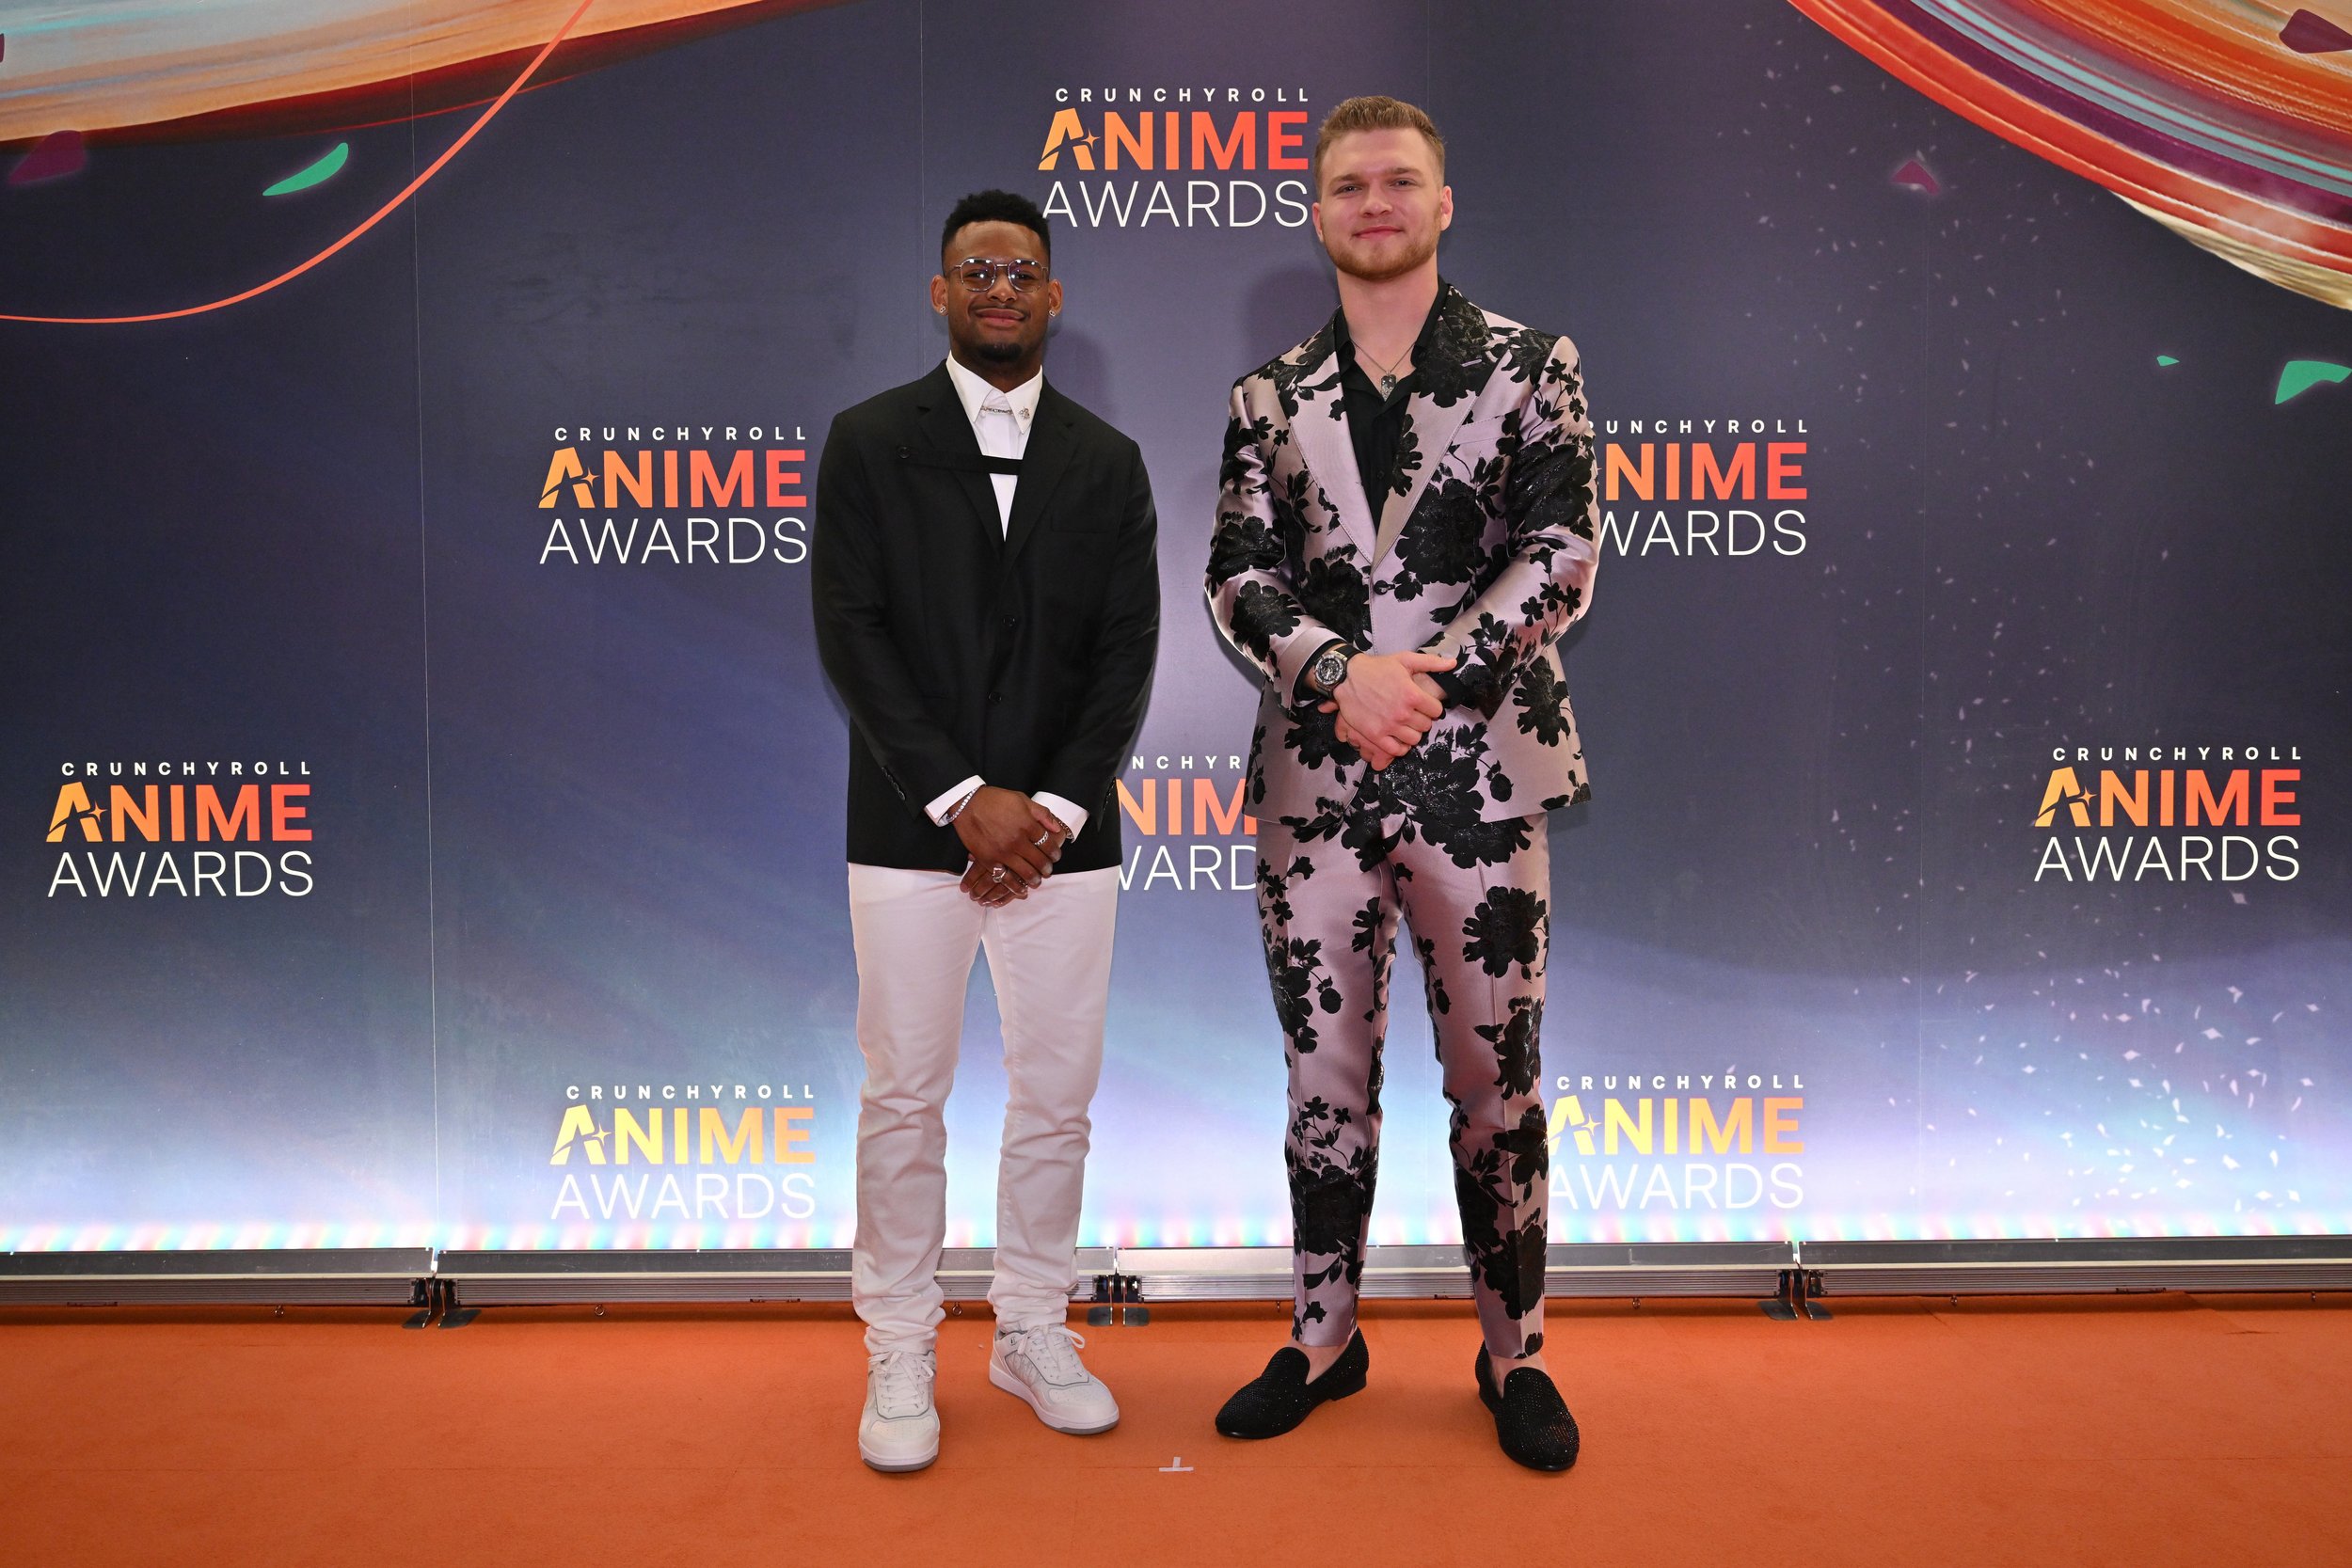 Avid anime fans and NFL stars Juju Smith-Schuster (Kansas City Chiefs) and Aidan Hutchinson (Detroit Lions) at the 2023 Crunchyroll Anime Awards in Tokyo.JPG